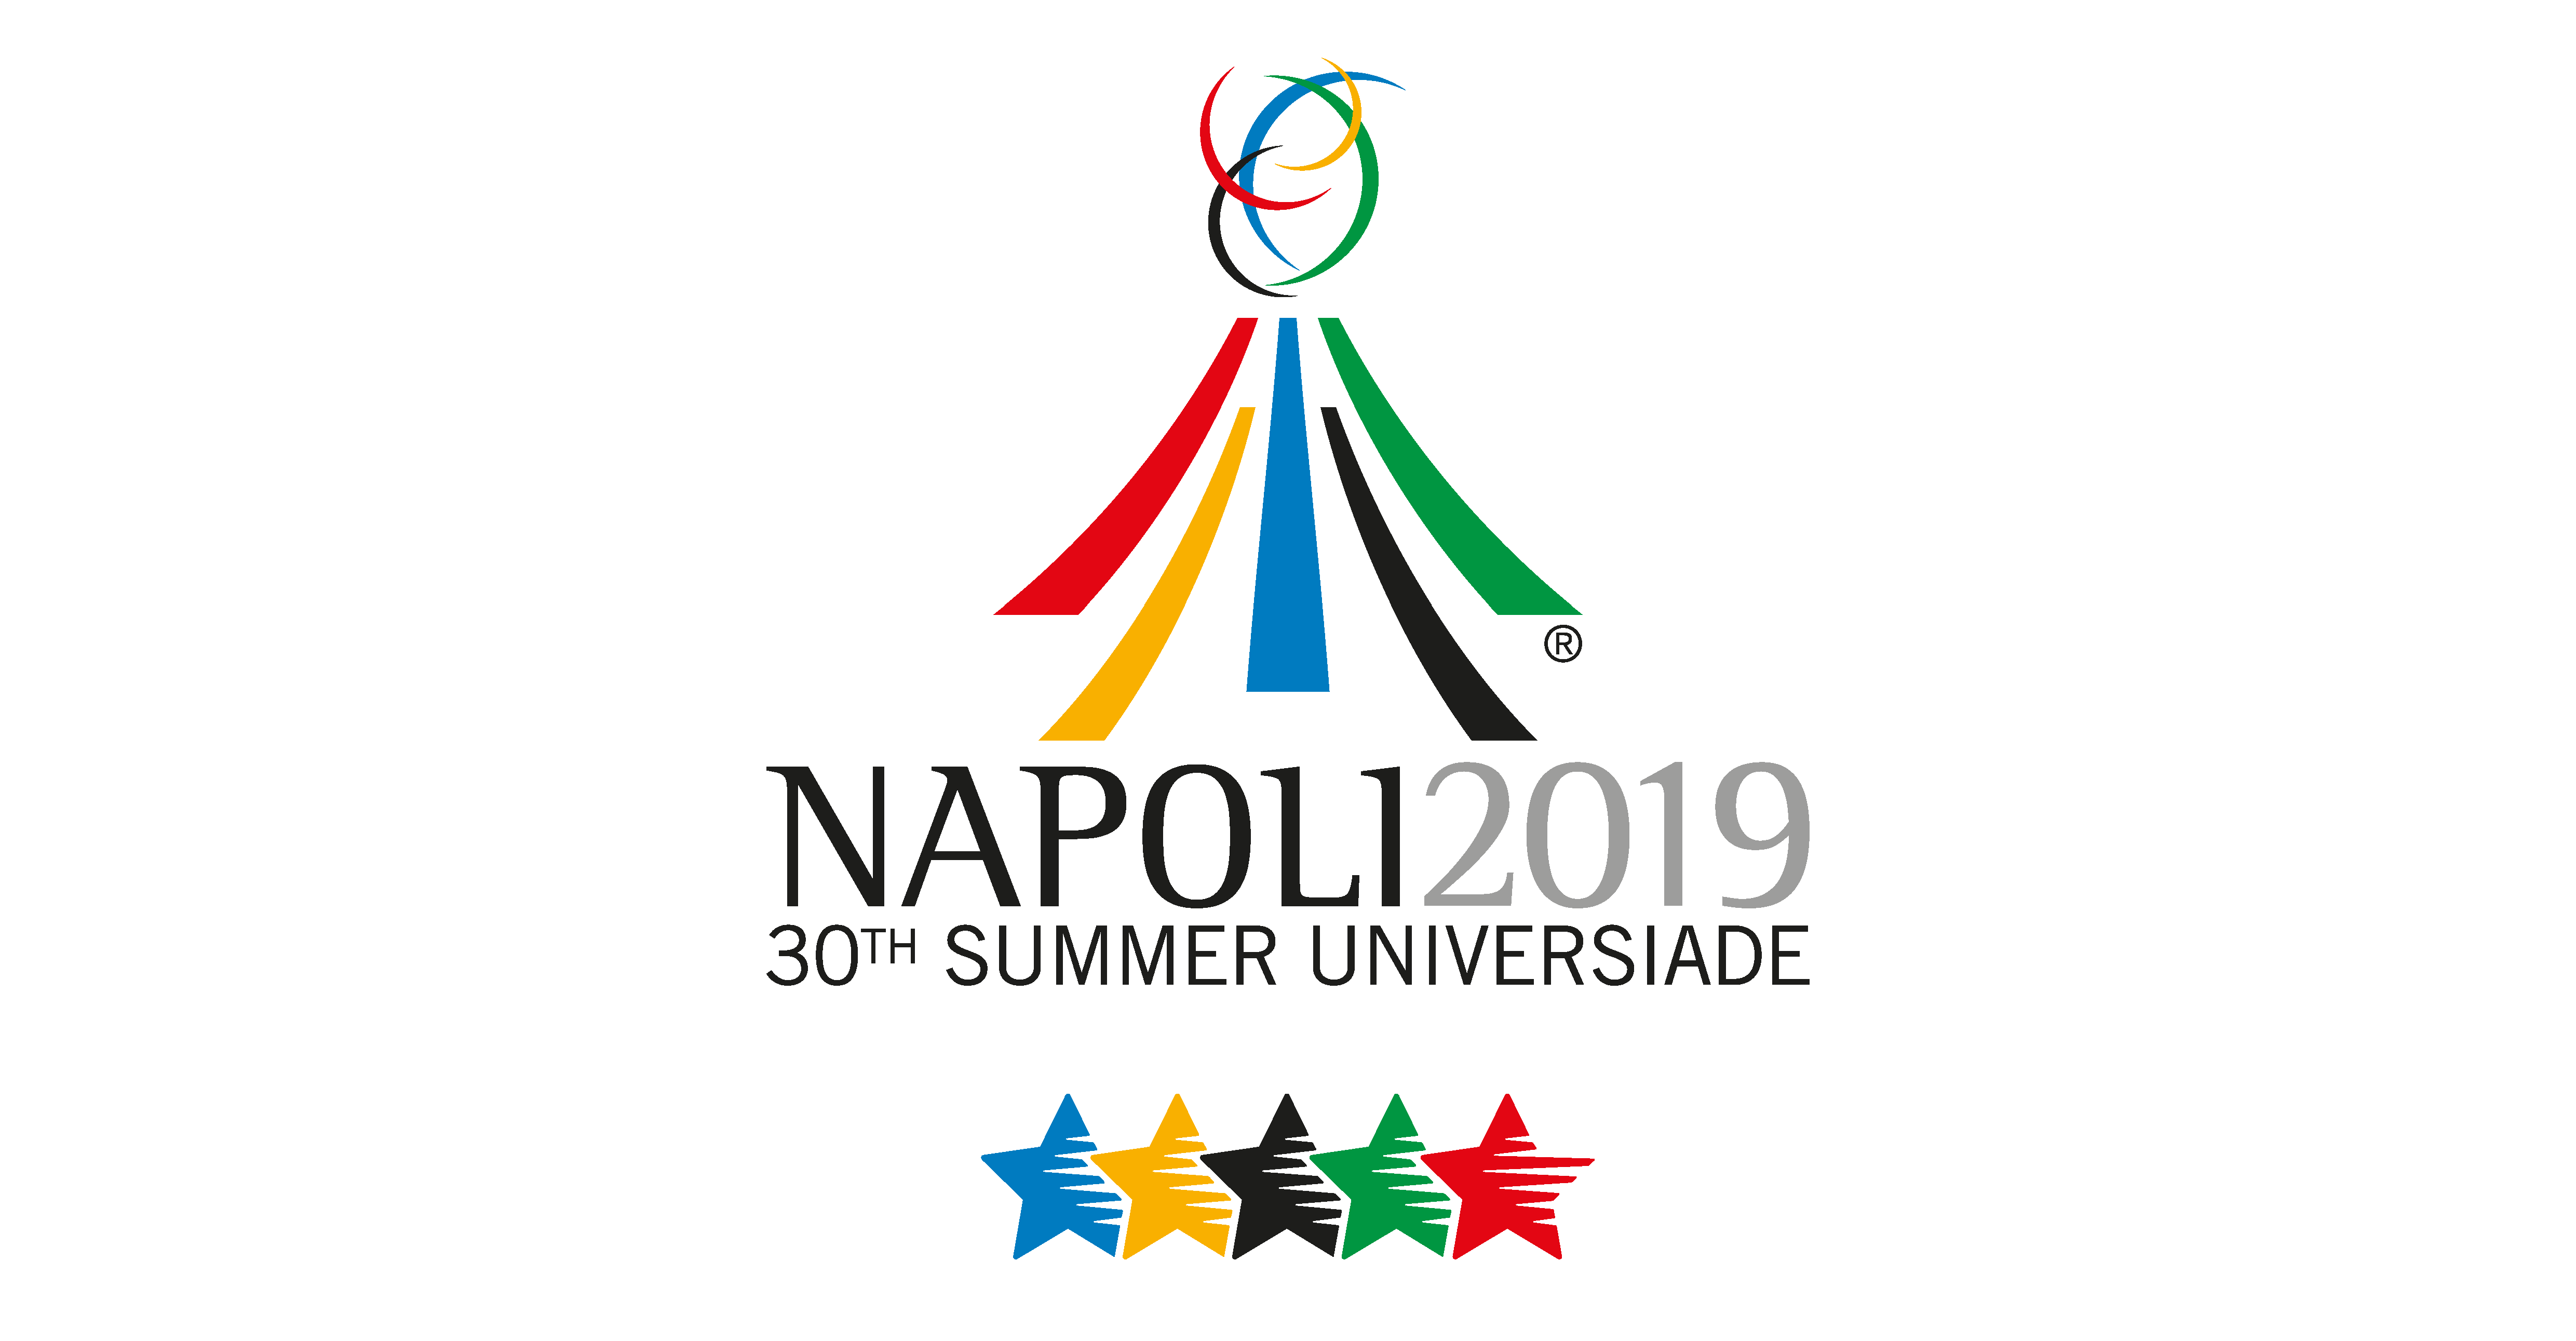 Balich Worldwide to produce Opening and Closing Ceremonies at Naples 2019